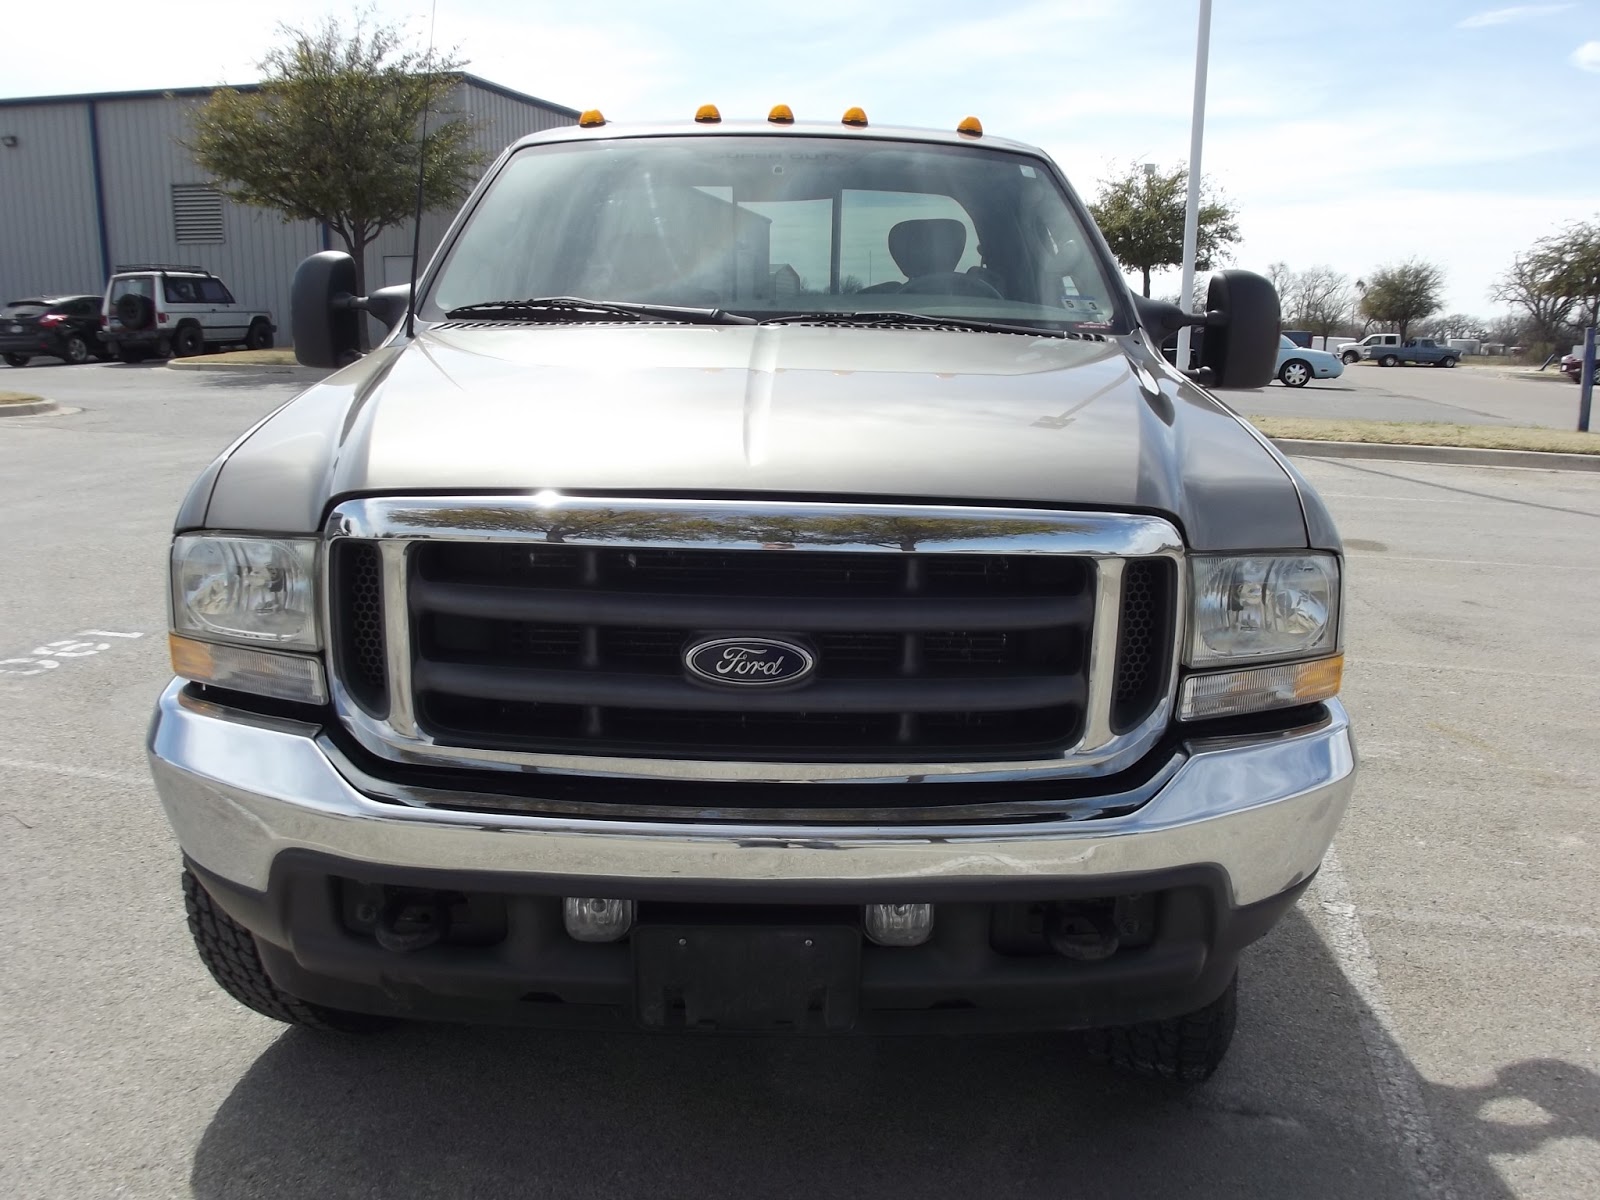 TDY Sales 817 243 9840 For Sale 2003 Ford F350 Lariat extended cab